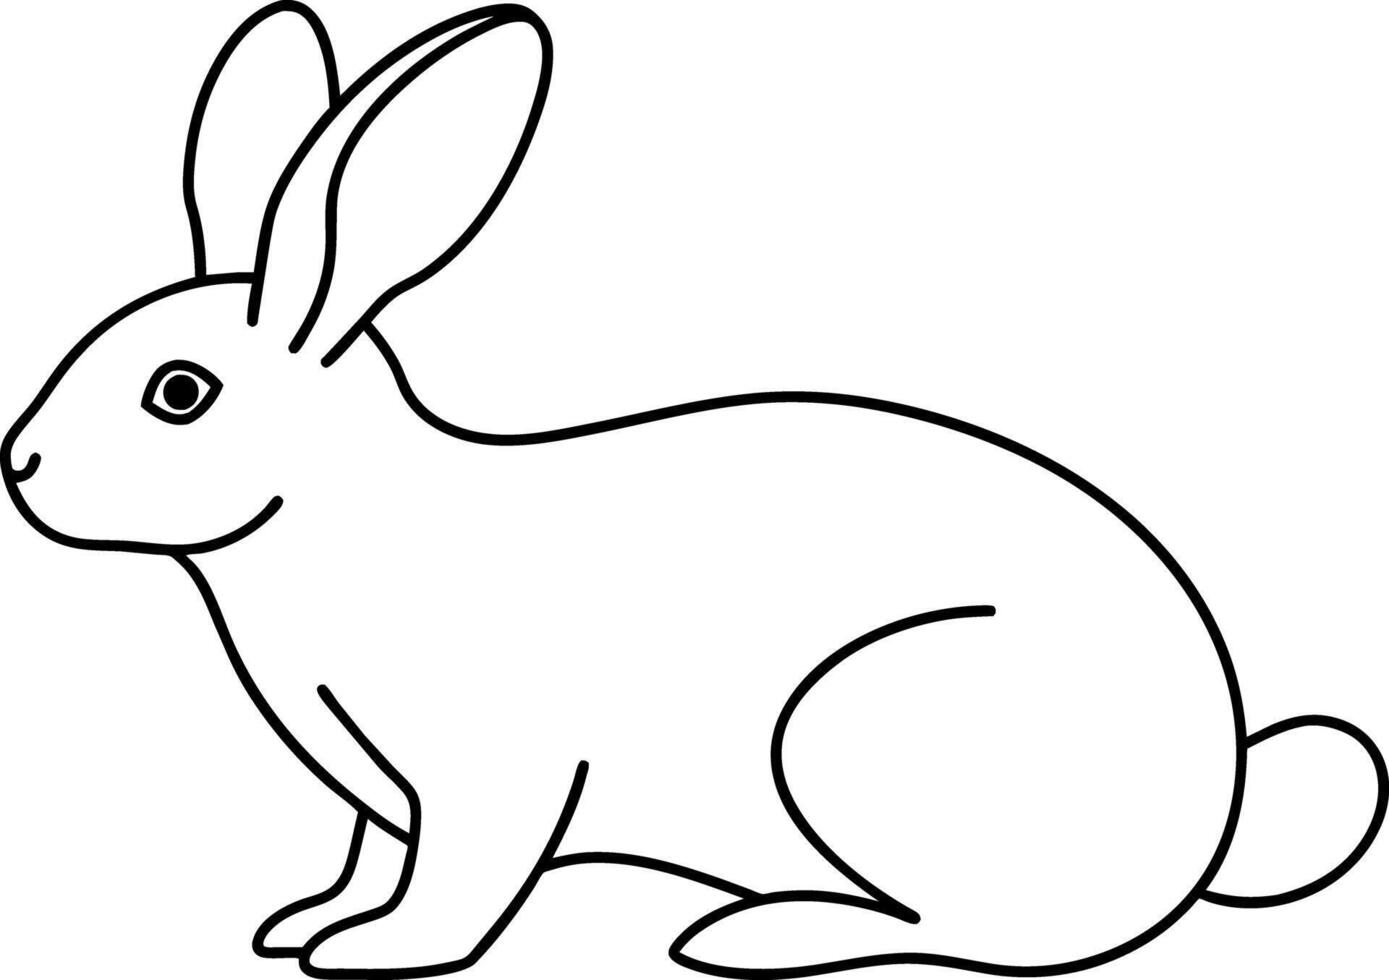 a rabbit is sitting in the coloring page vector